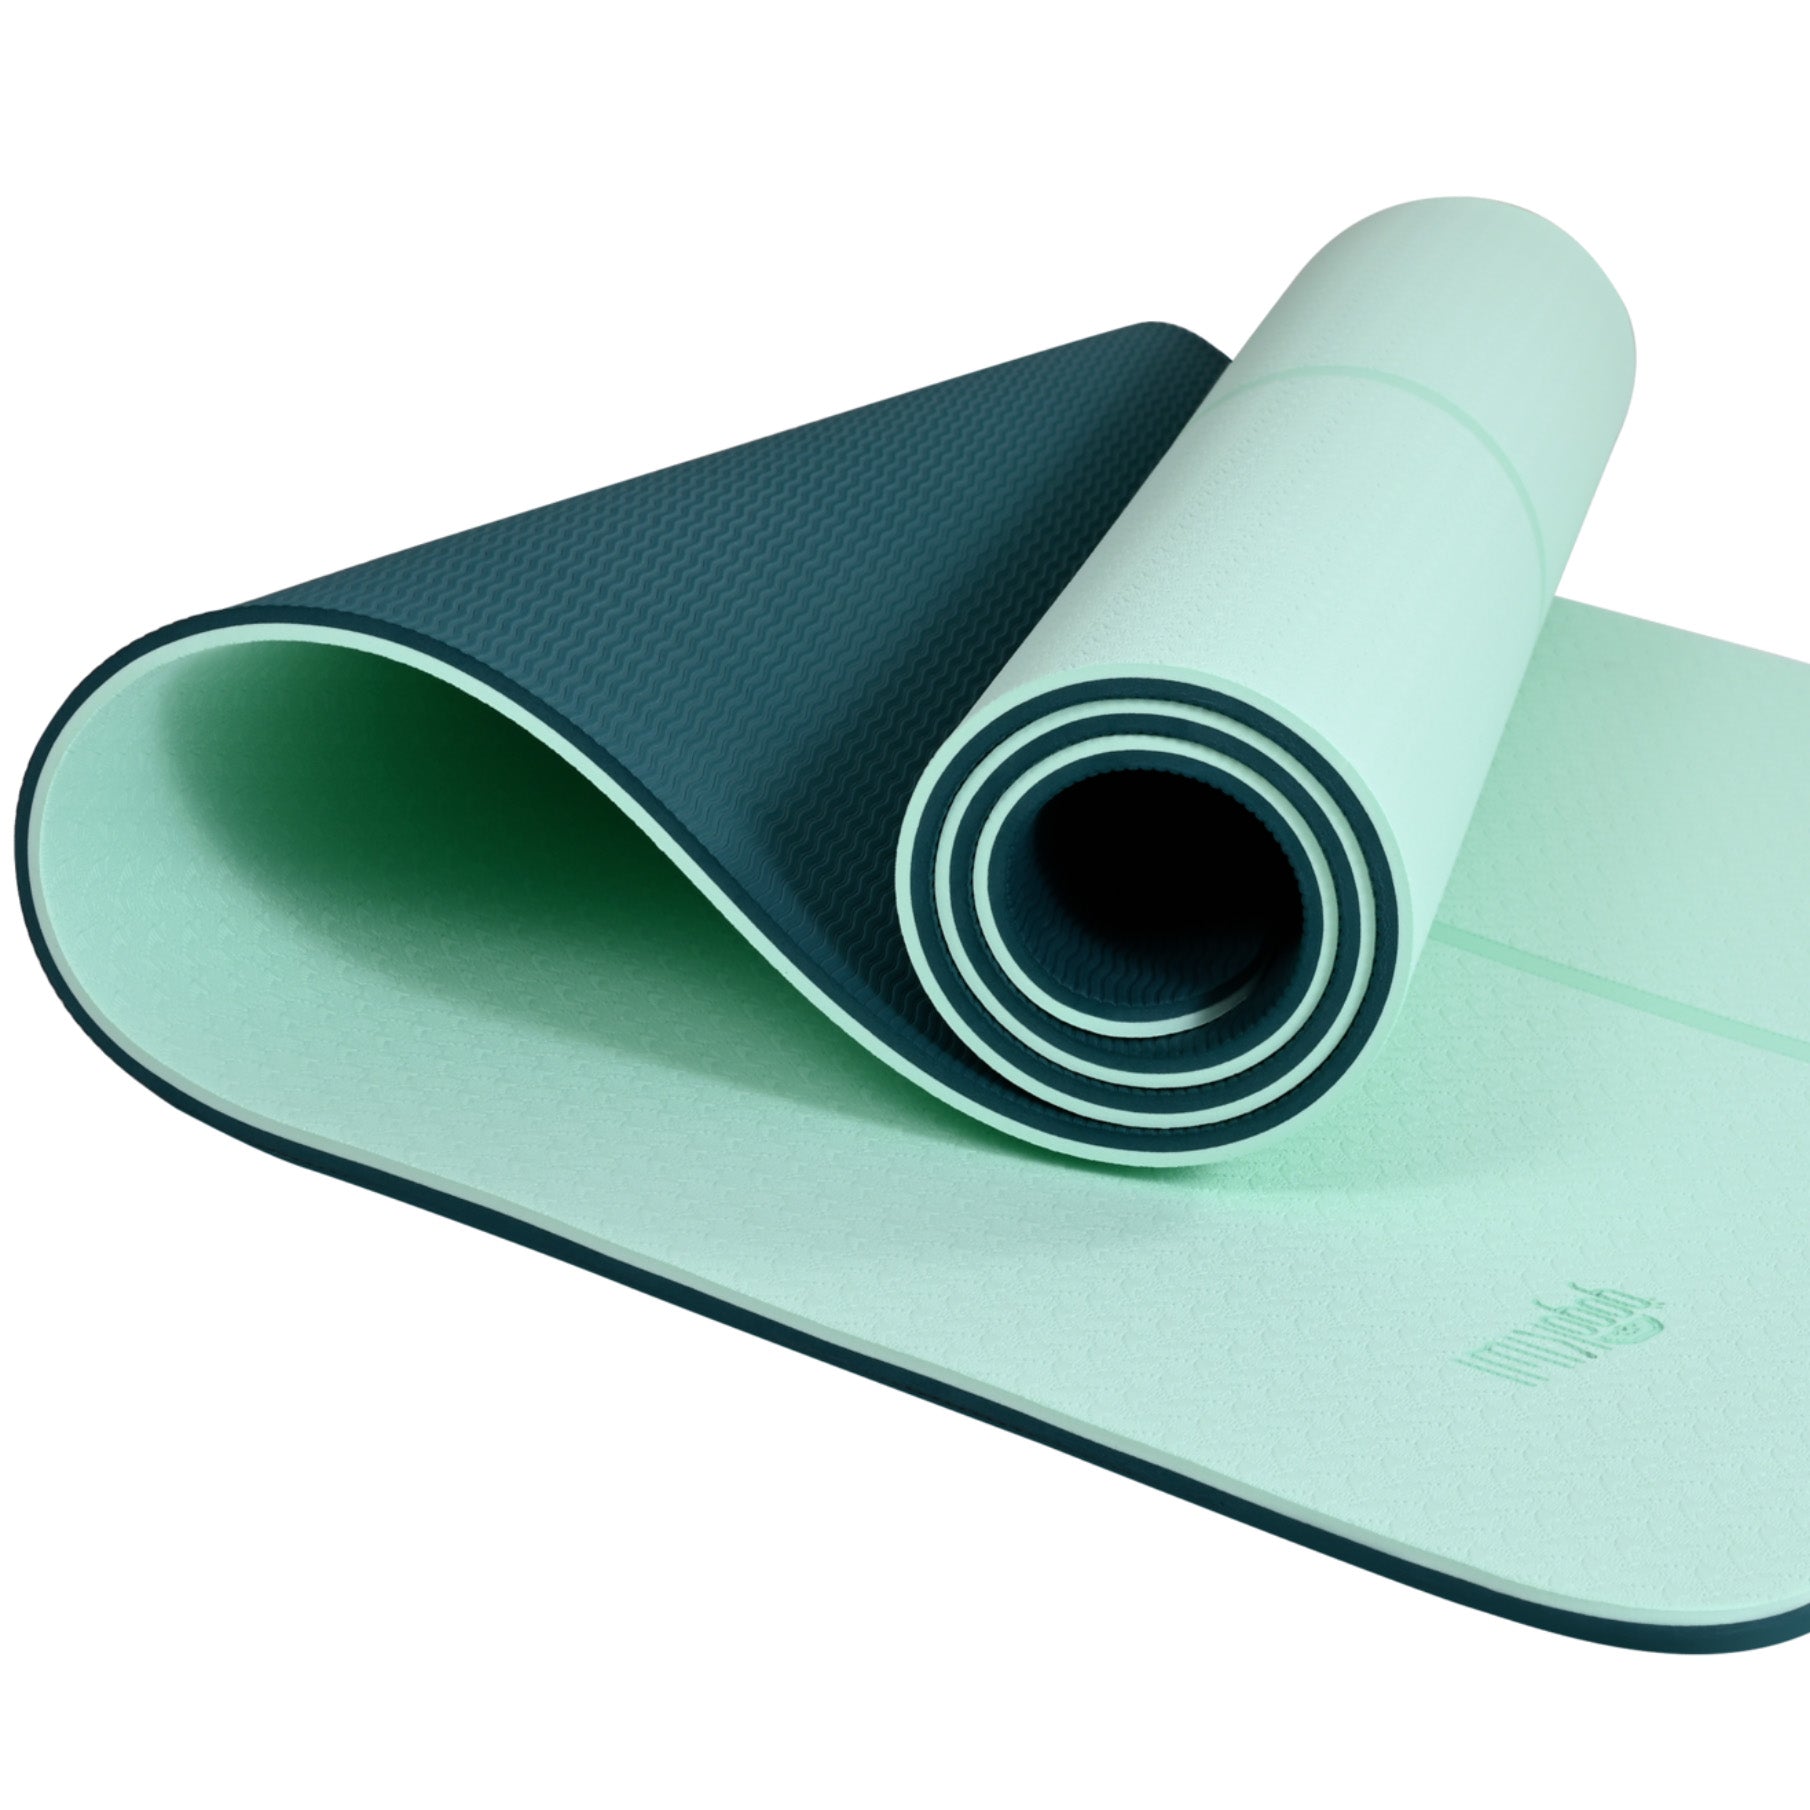 Best Deal in Canada  Pure Fitness Extra Thick 1 2 Yoga Mat - Green 8624FML  - Canada's best deals on Electronics, TVs, Unlocked Cell Phones, Macbooks,  Laptops, Kitchen Appliances, Toys, Bed